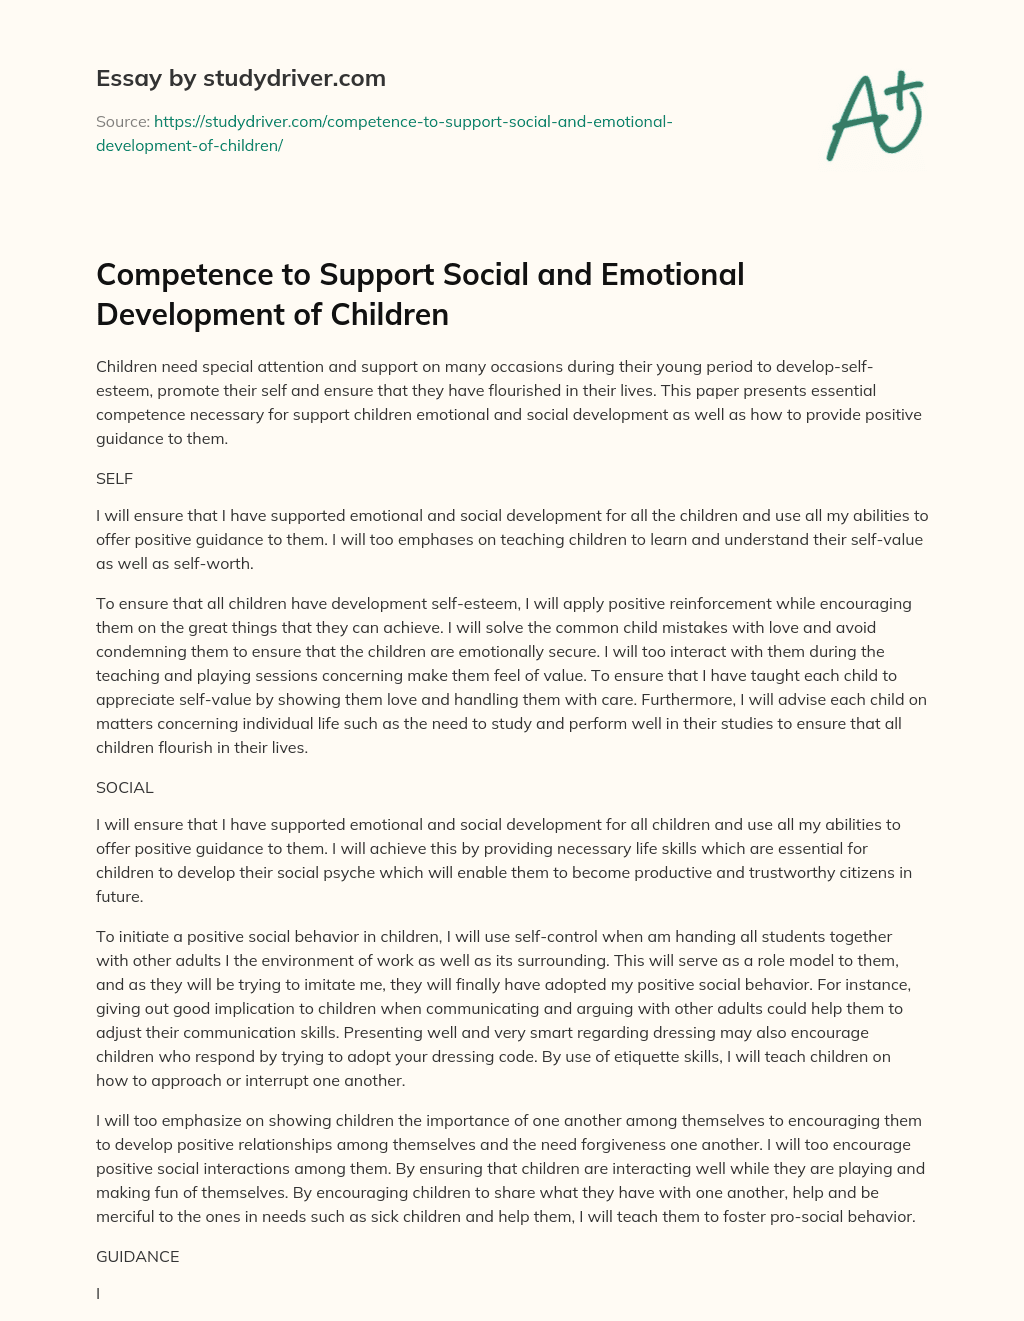 Competence to Support Social and Emotional Development of Children essay